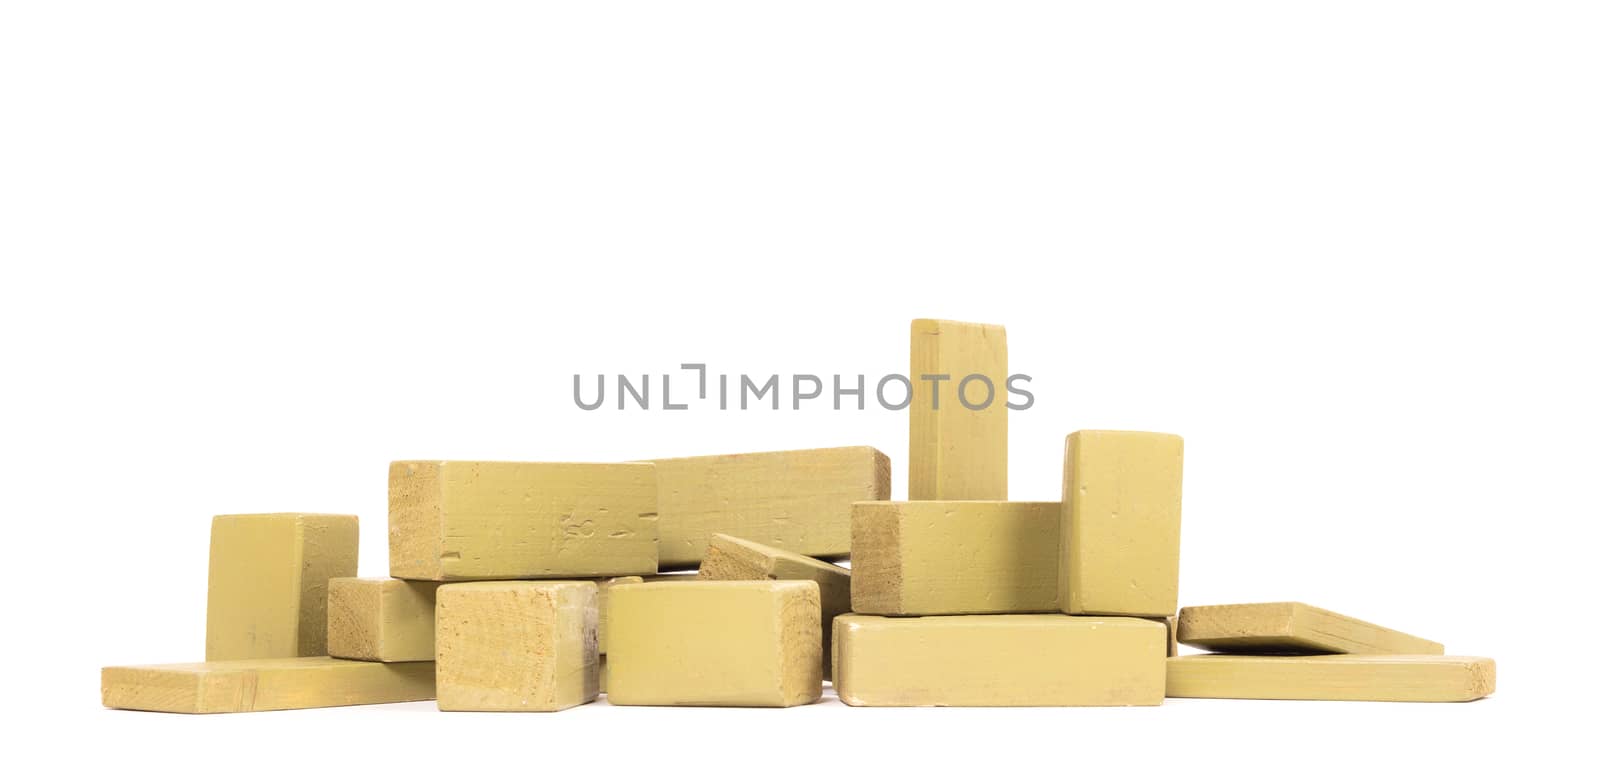 Vintage green building blocks isolated on white background